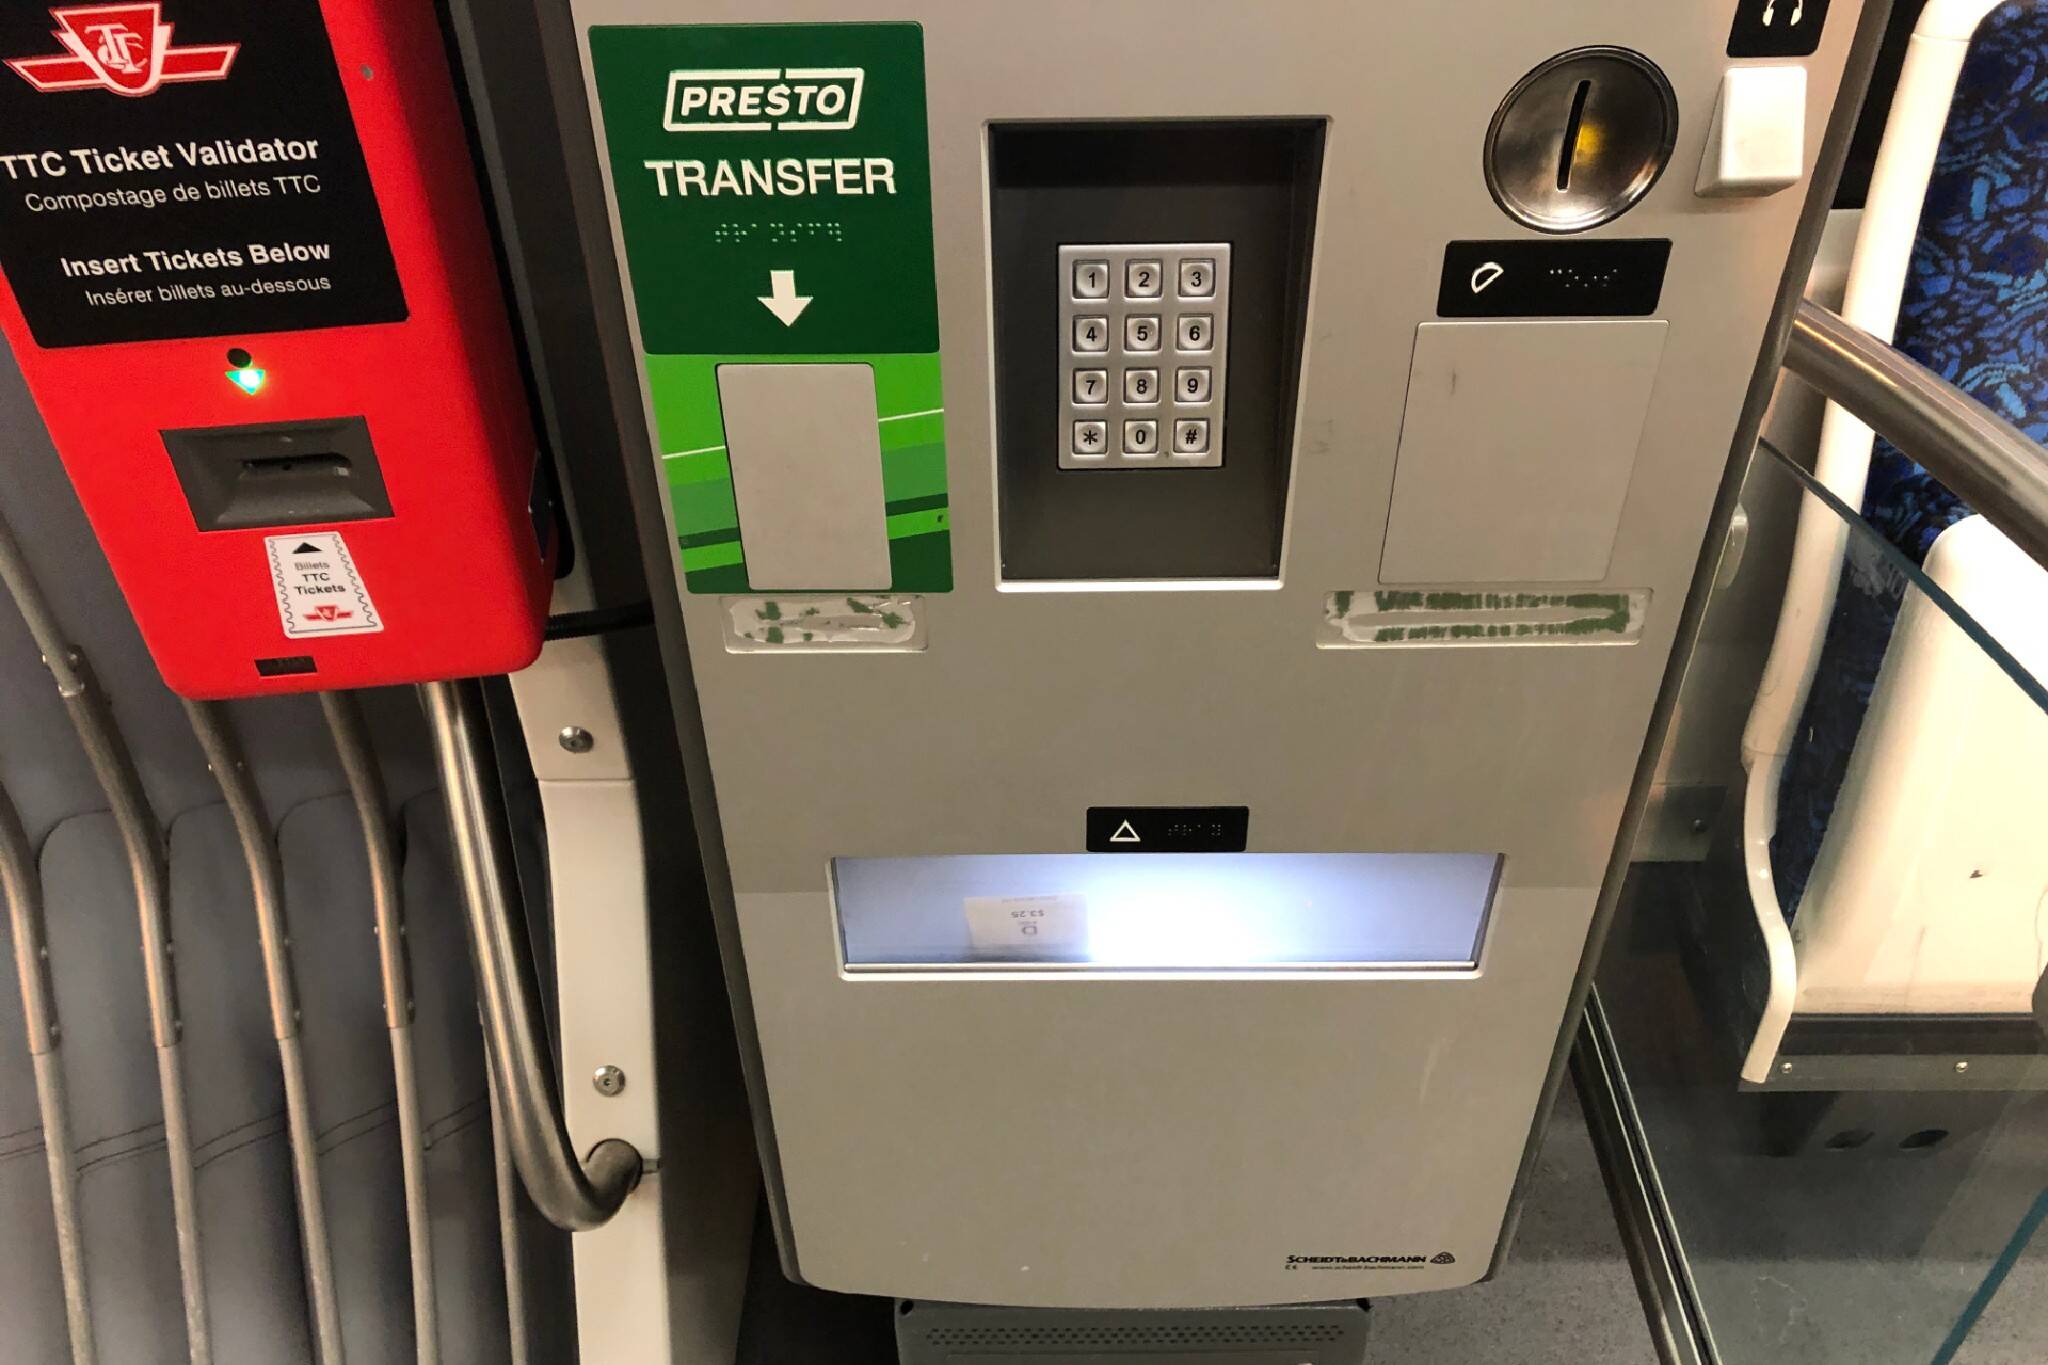 This is why TTC fare machines don't give change back